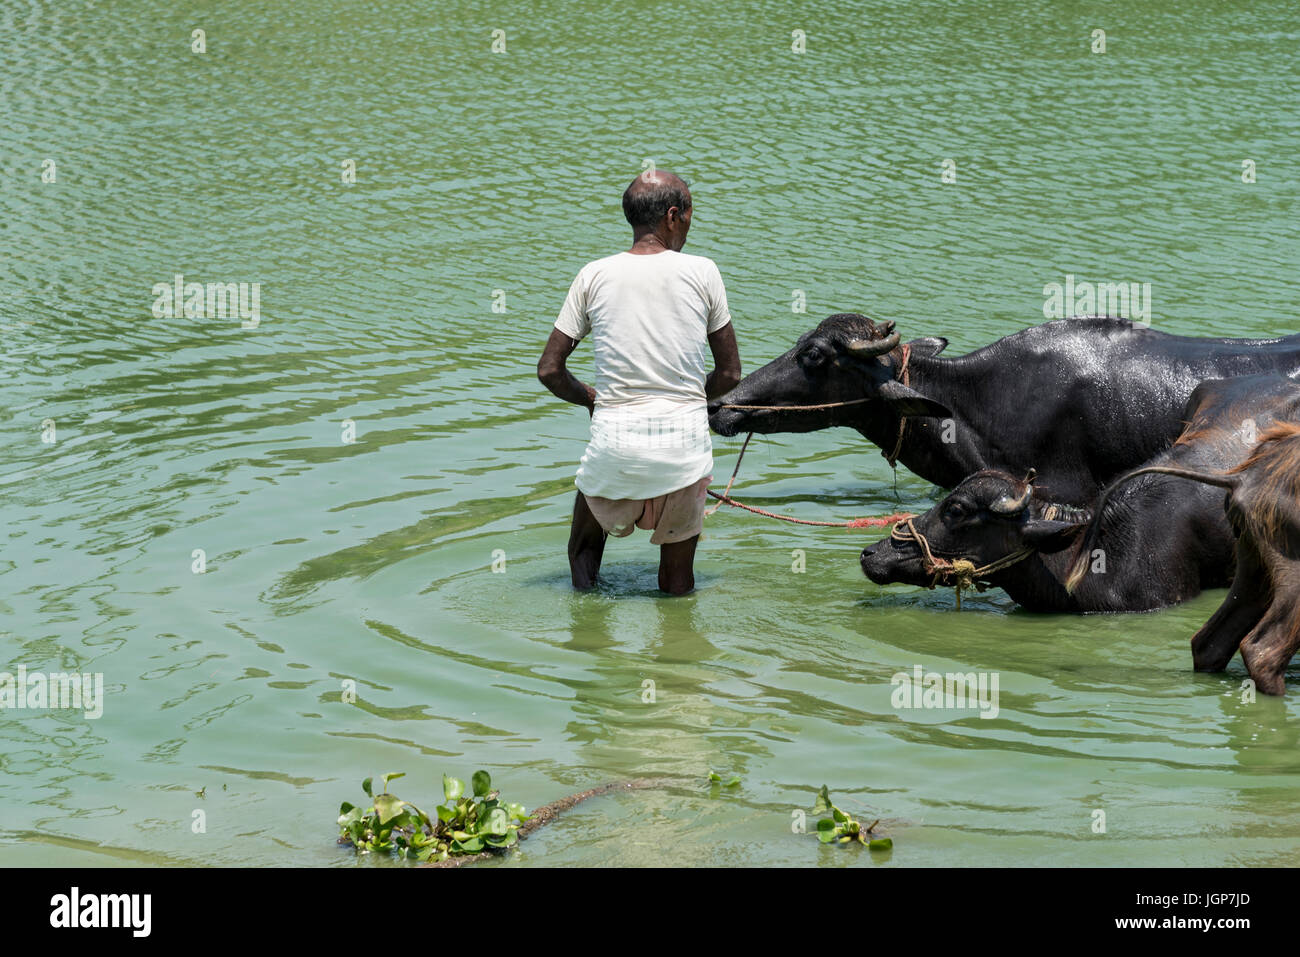 People cleaning their buffalo in a local pond in their village Stock Photo